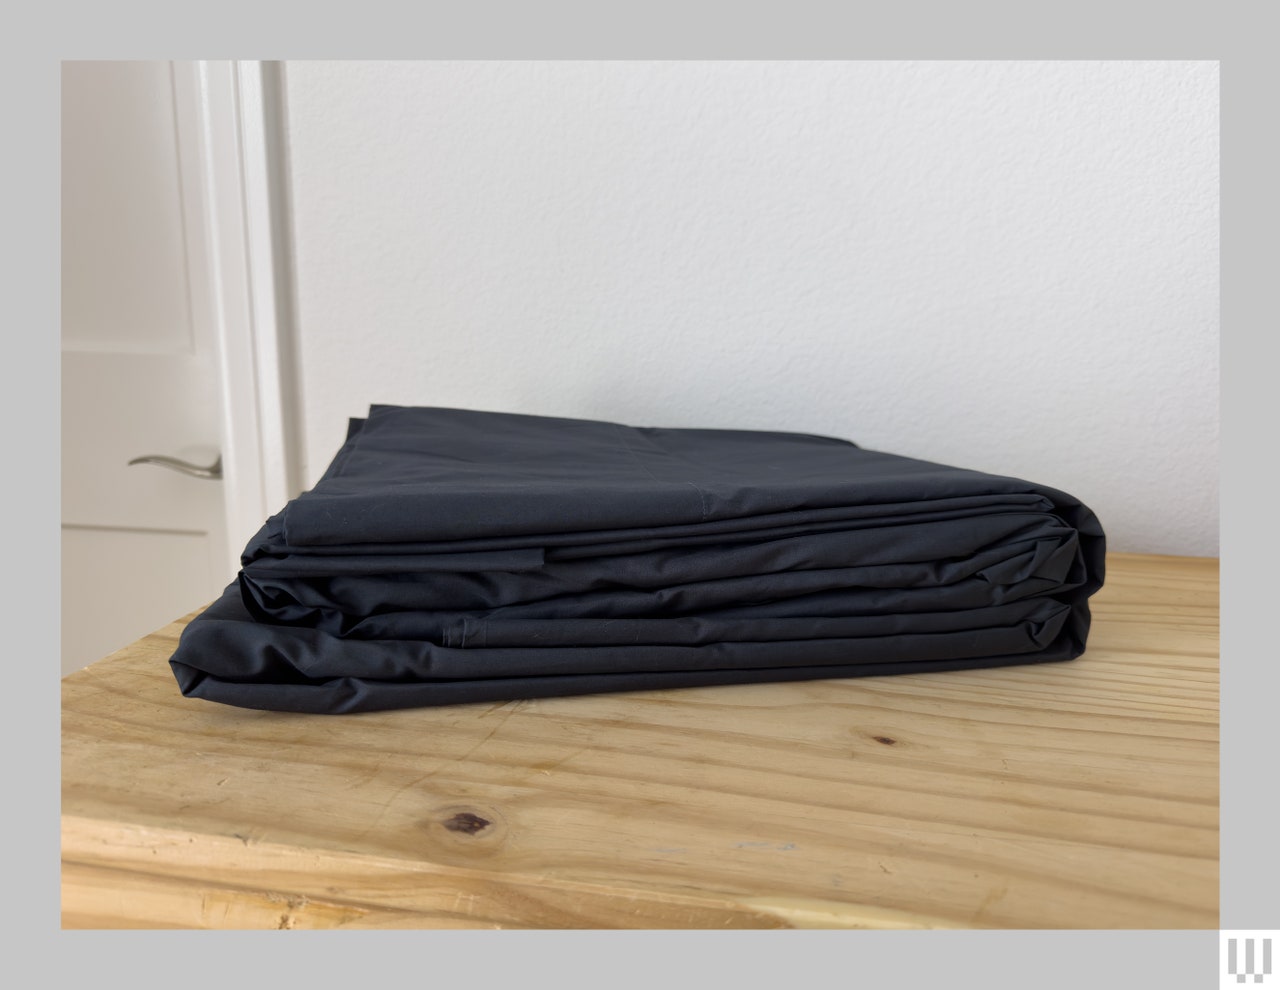 Black sheets folded on top of a wooden surface